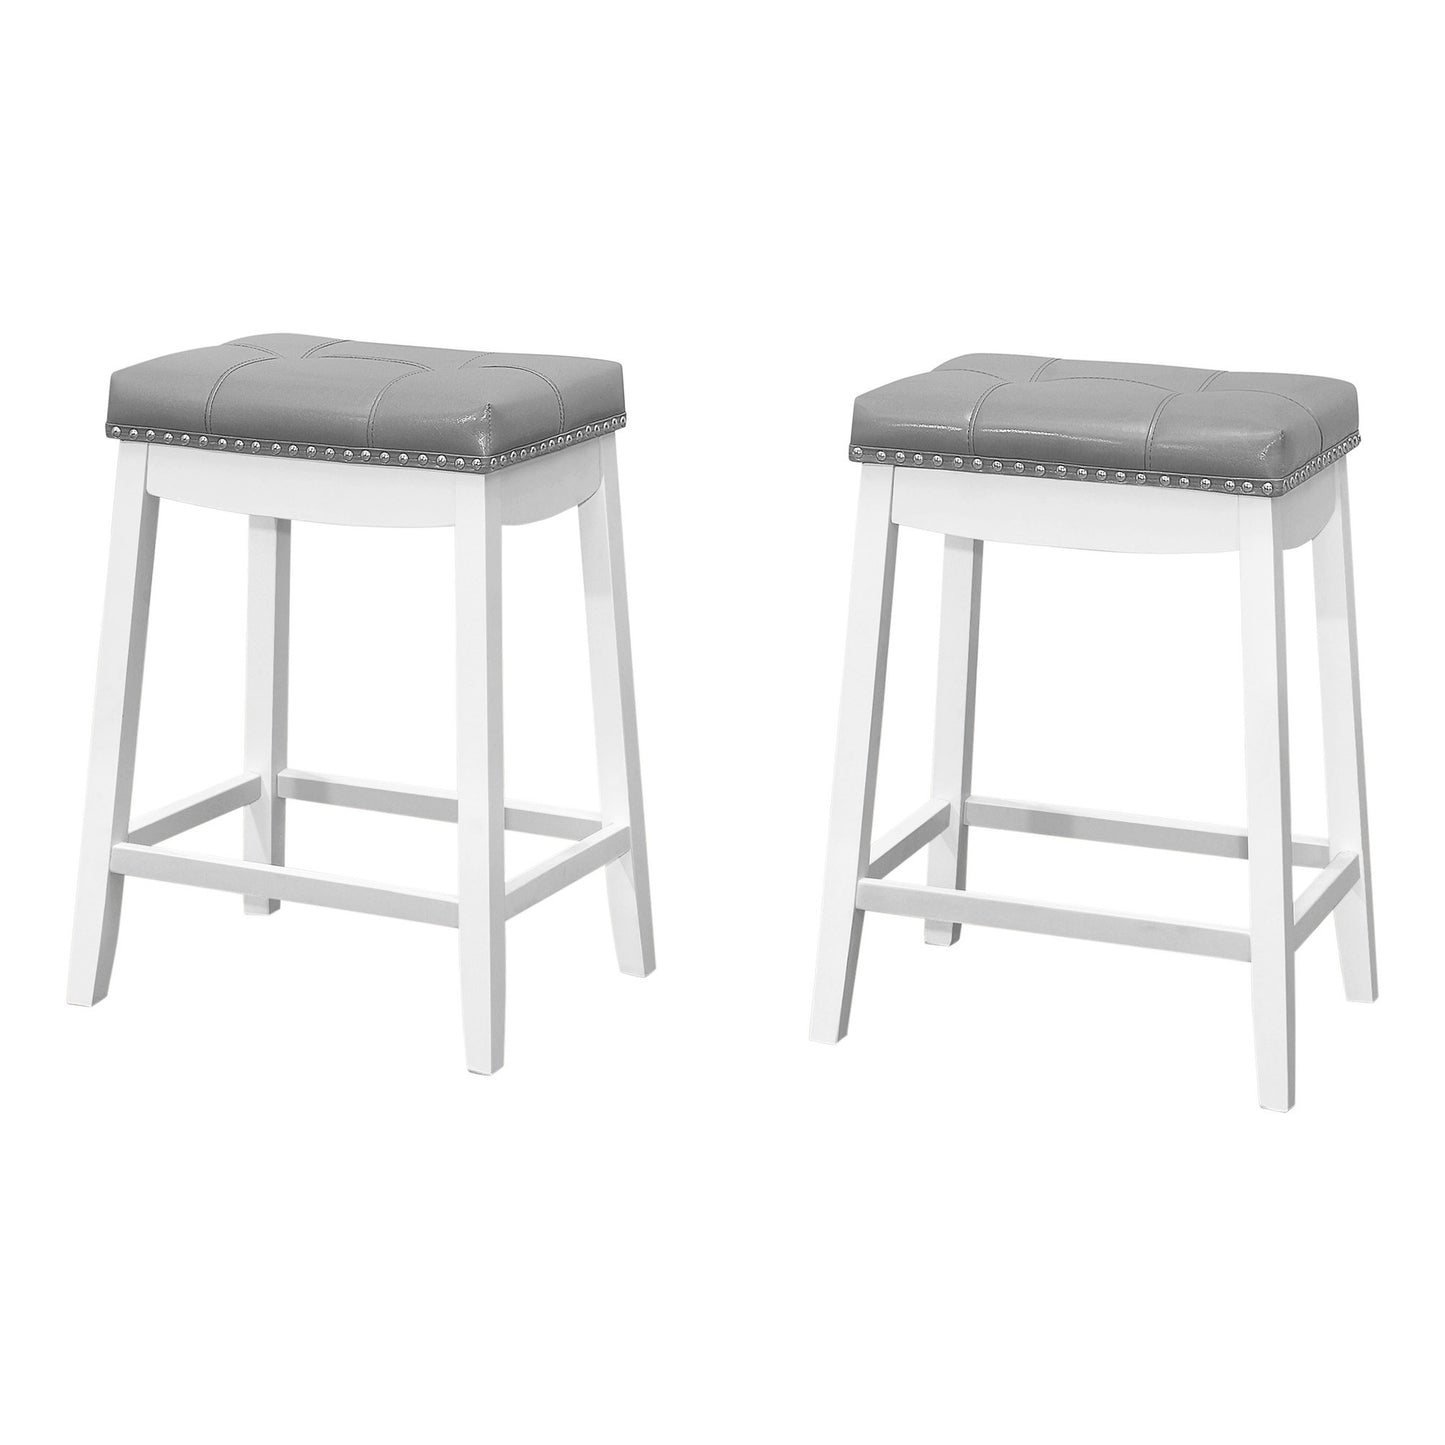 Set Of Two 25" Gray And White Faux Leather And Solid Wood Backless Counter Height Bar Chairs With Footrest